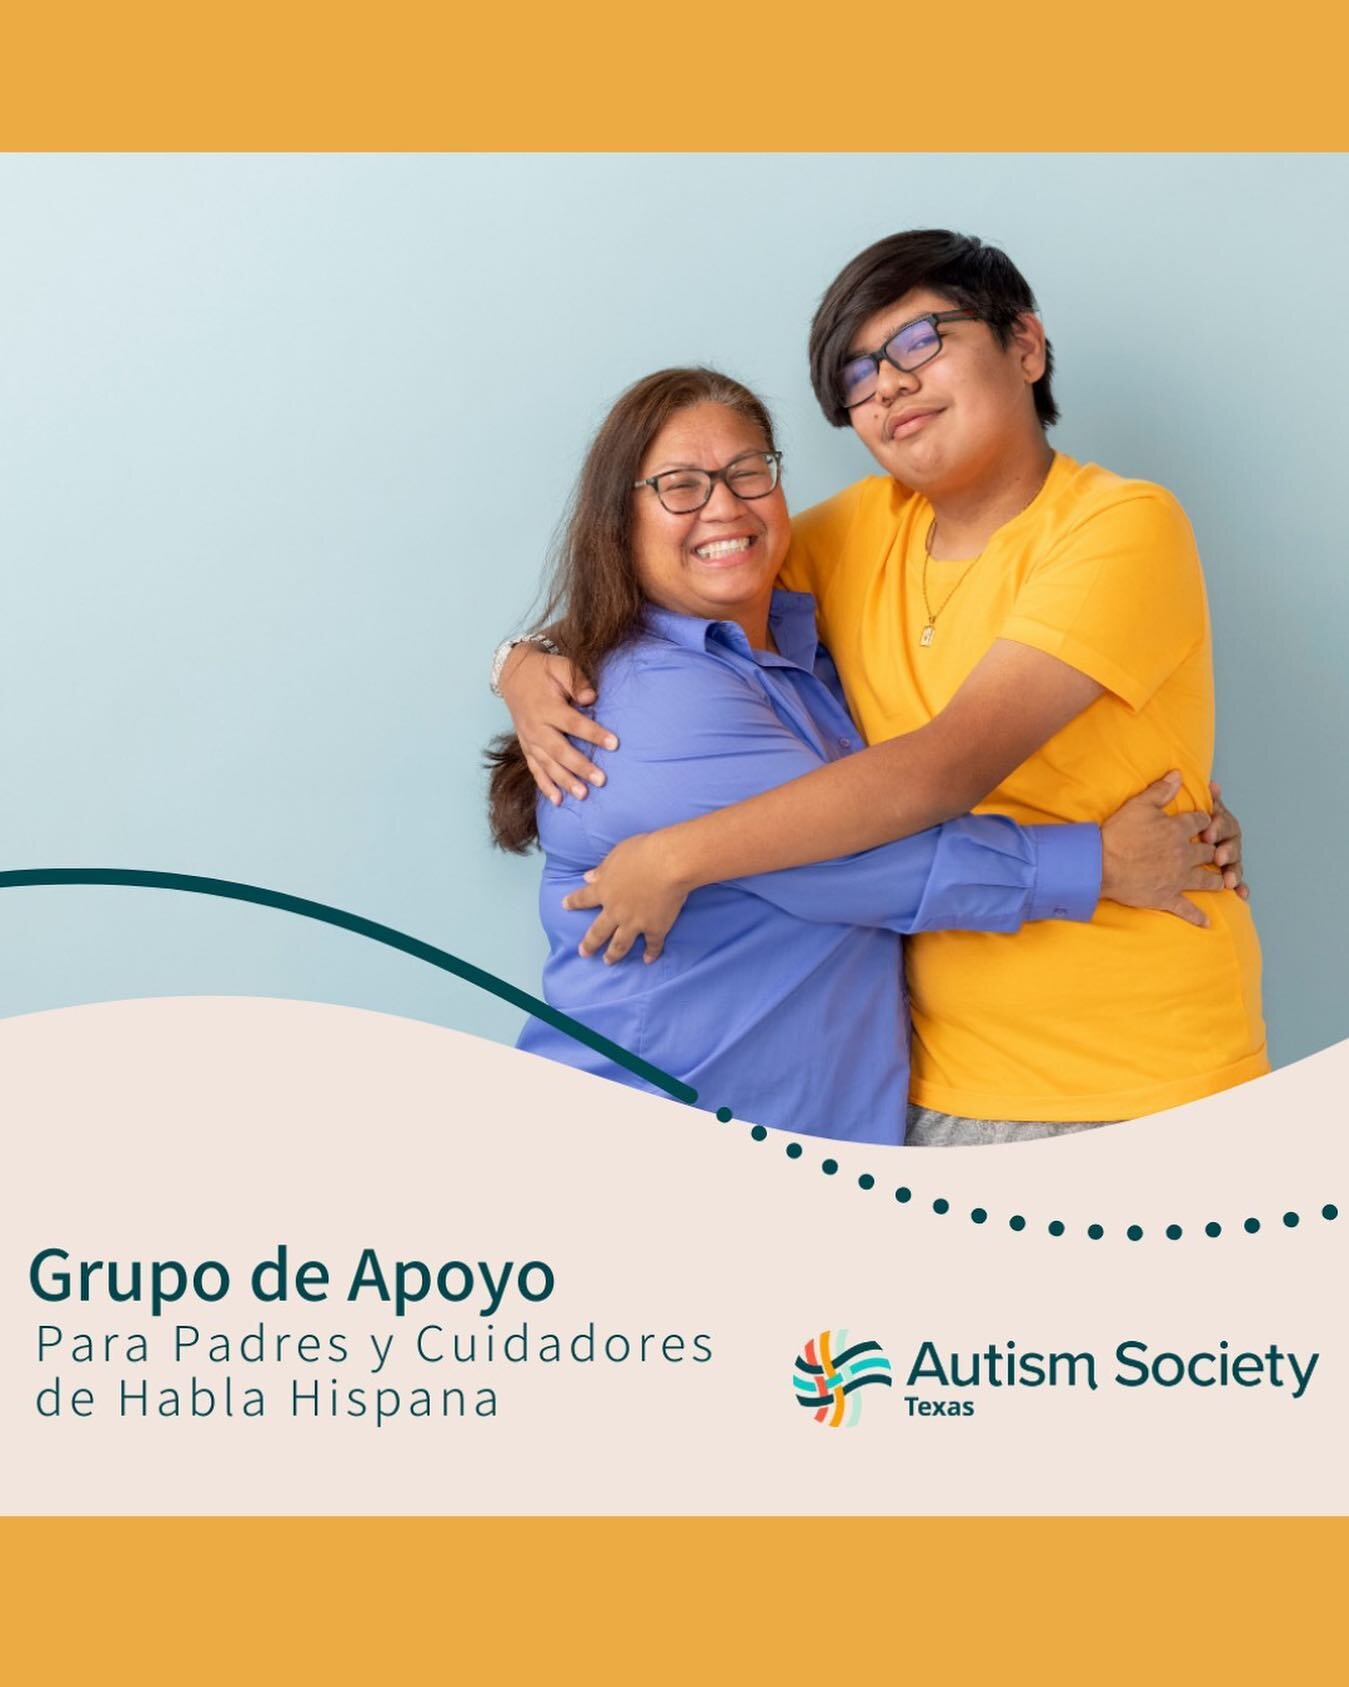 Wanted to shout out Texas Autism Society. I had the privilege of sitting in on a Spanish caregiver support group. This is a standing weekly time for Spanish-speaking caregivers to virtually connect with each other, ask questions, share resources, and